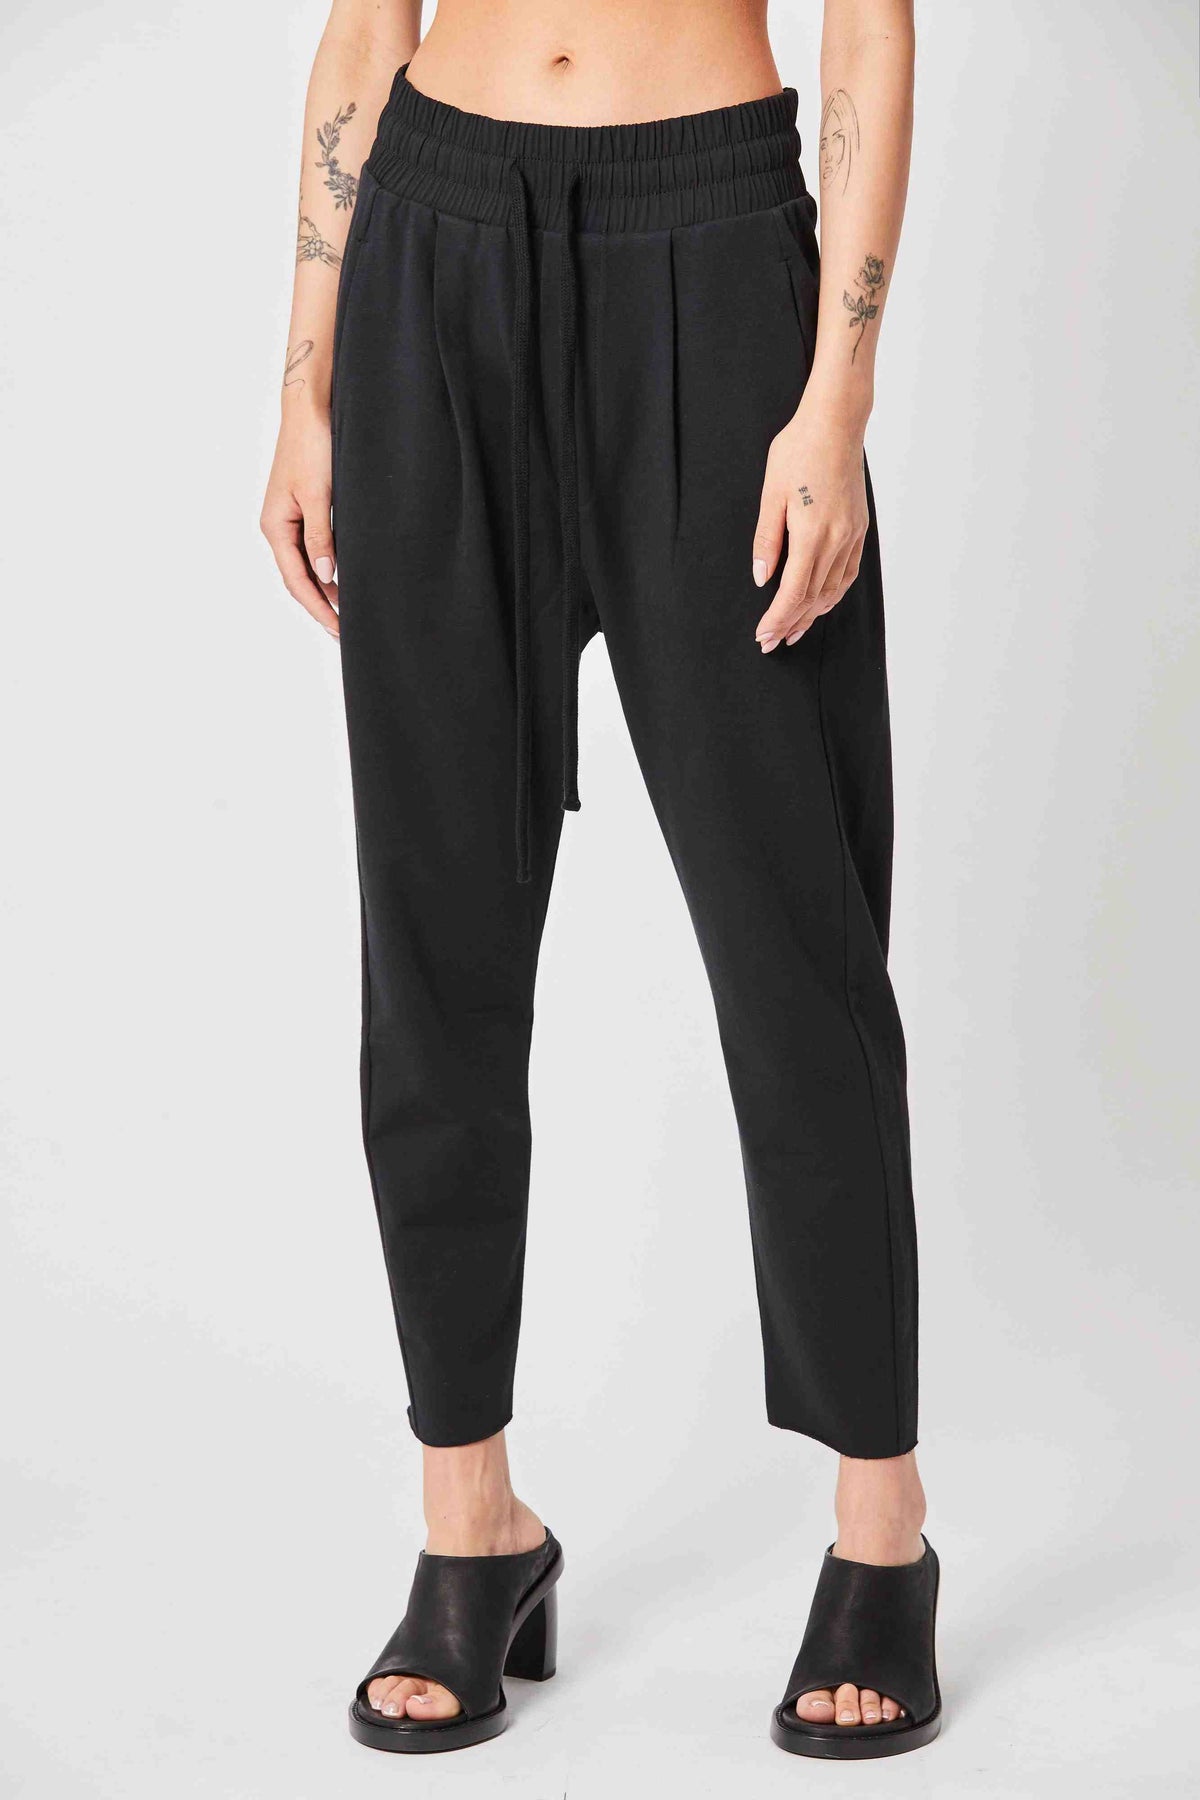 WST338 Relaxed Pant Black